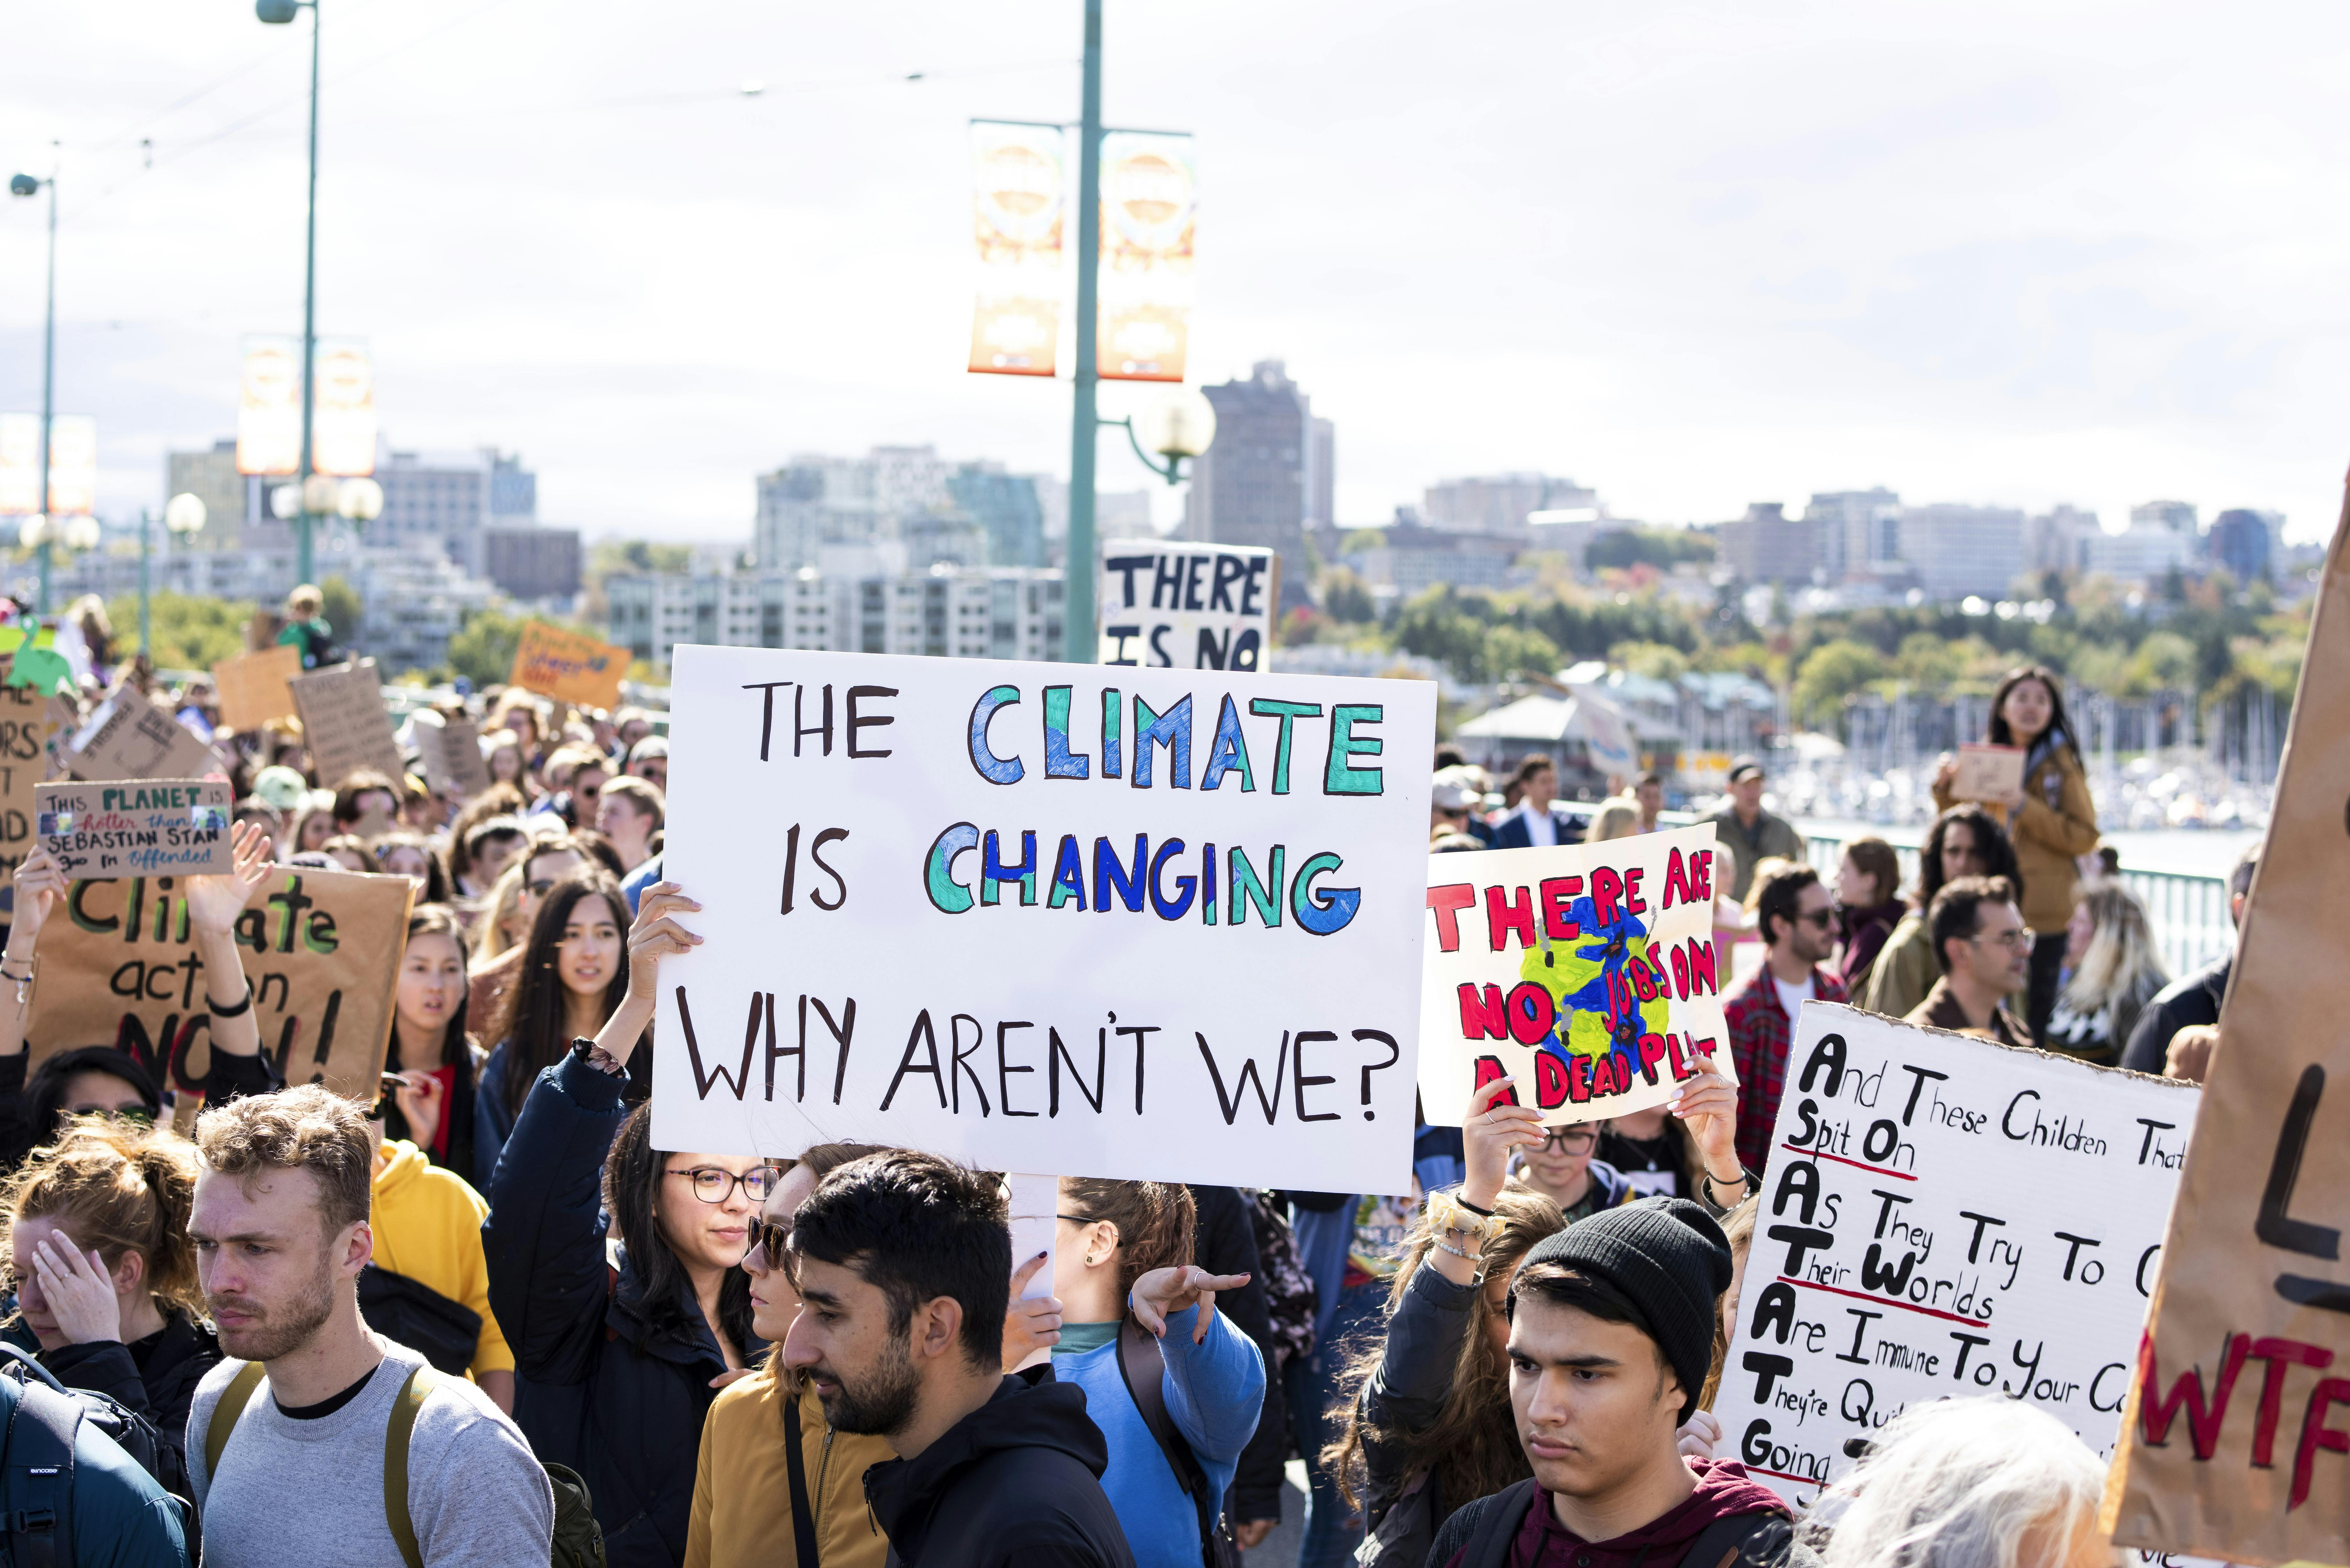 Thousands of people participate in the 2019 Climate Strike across the Cambie Bridge, Vancouver.